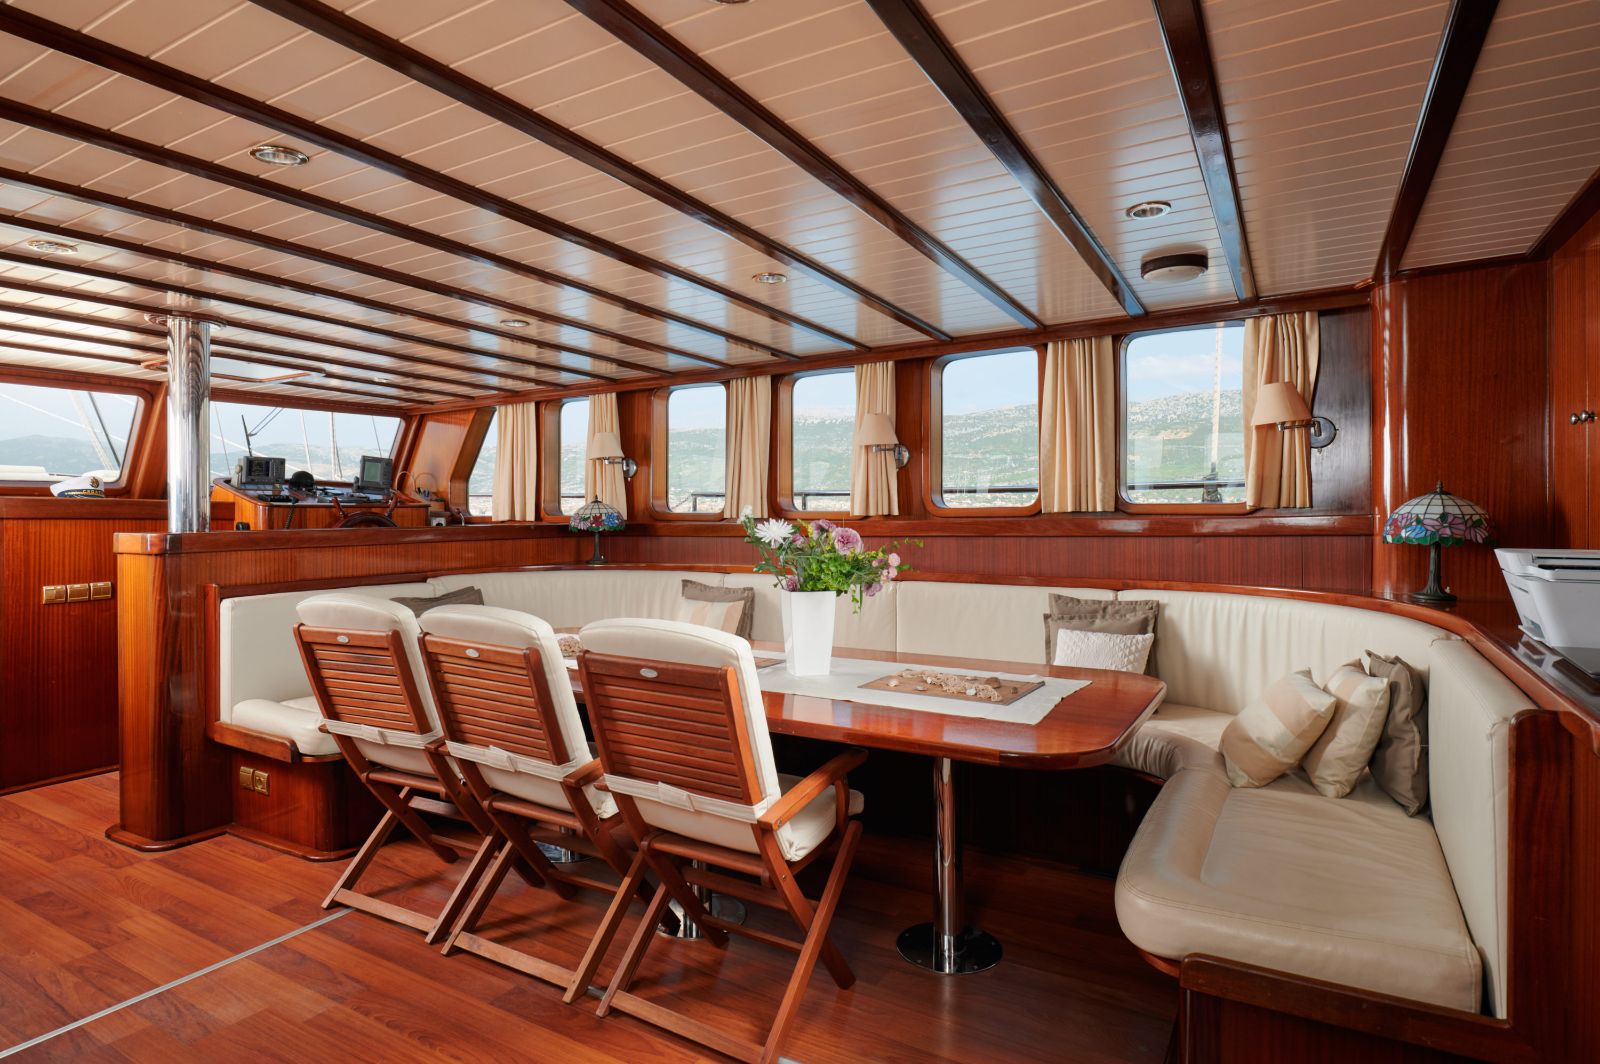 Interior dining table onboard the Queen of Adriatic gulet in Croatia